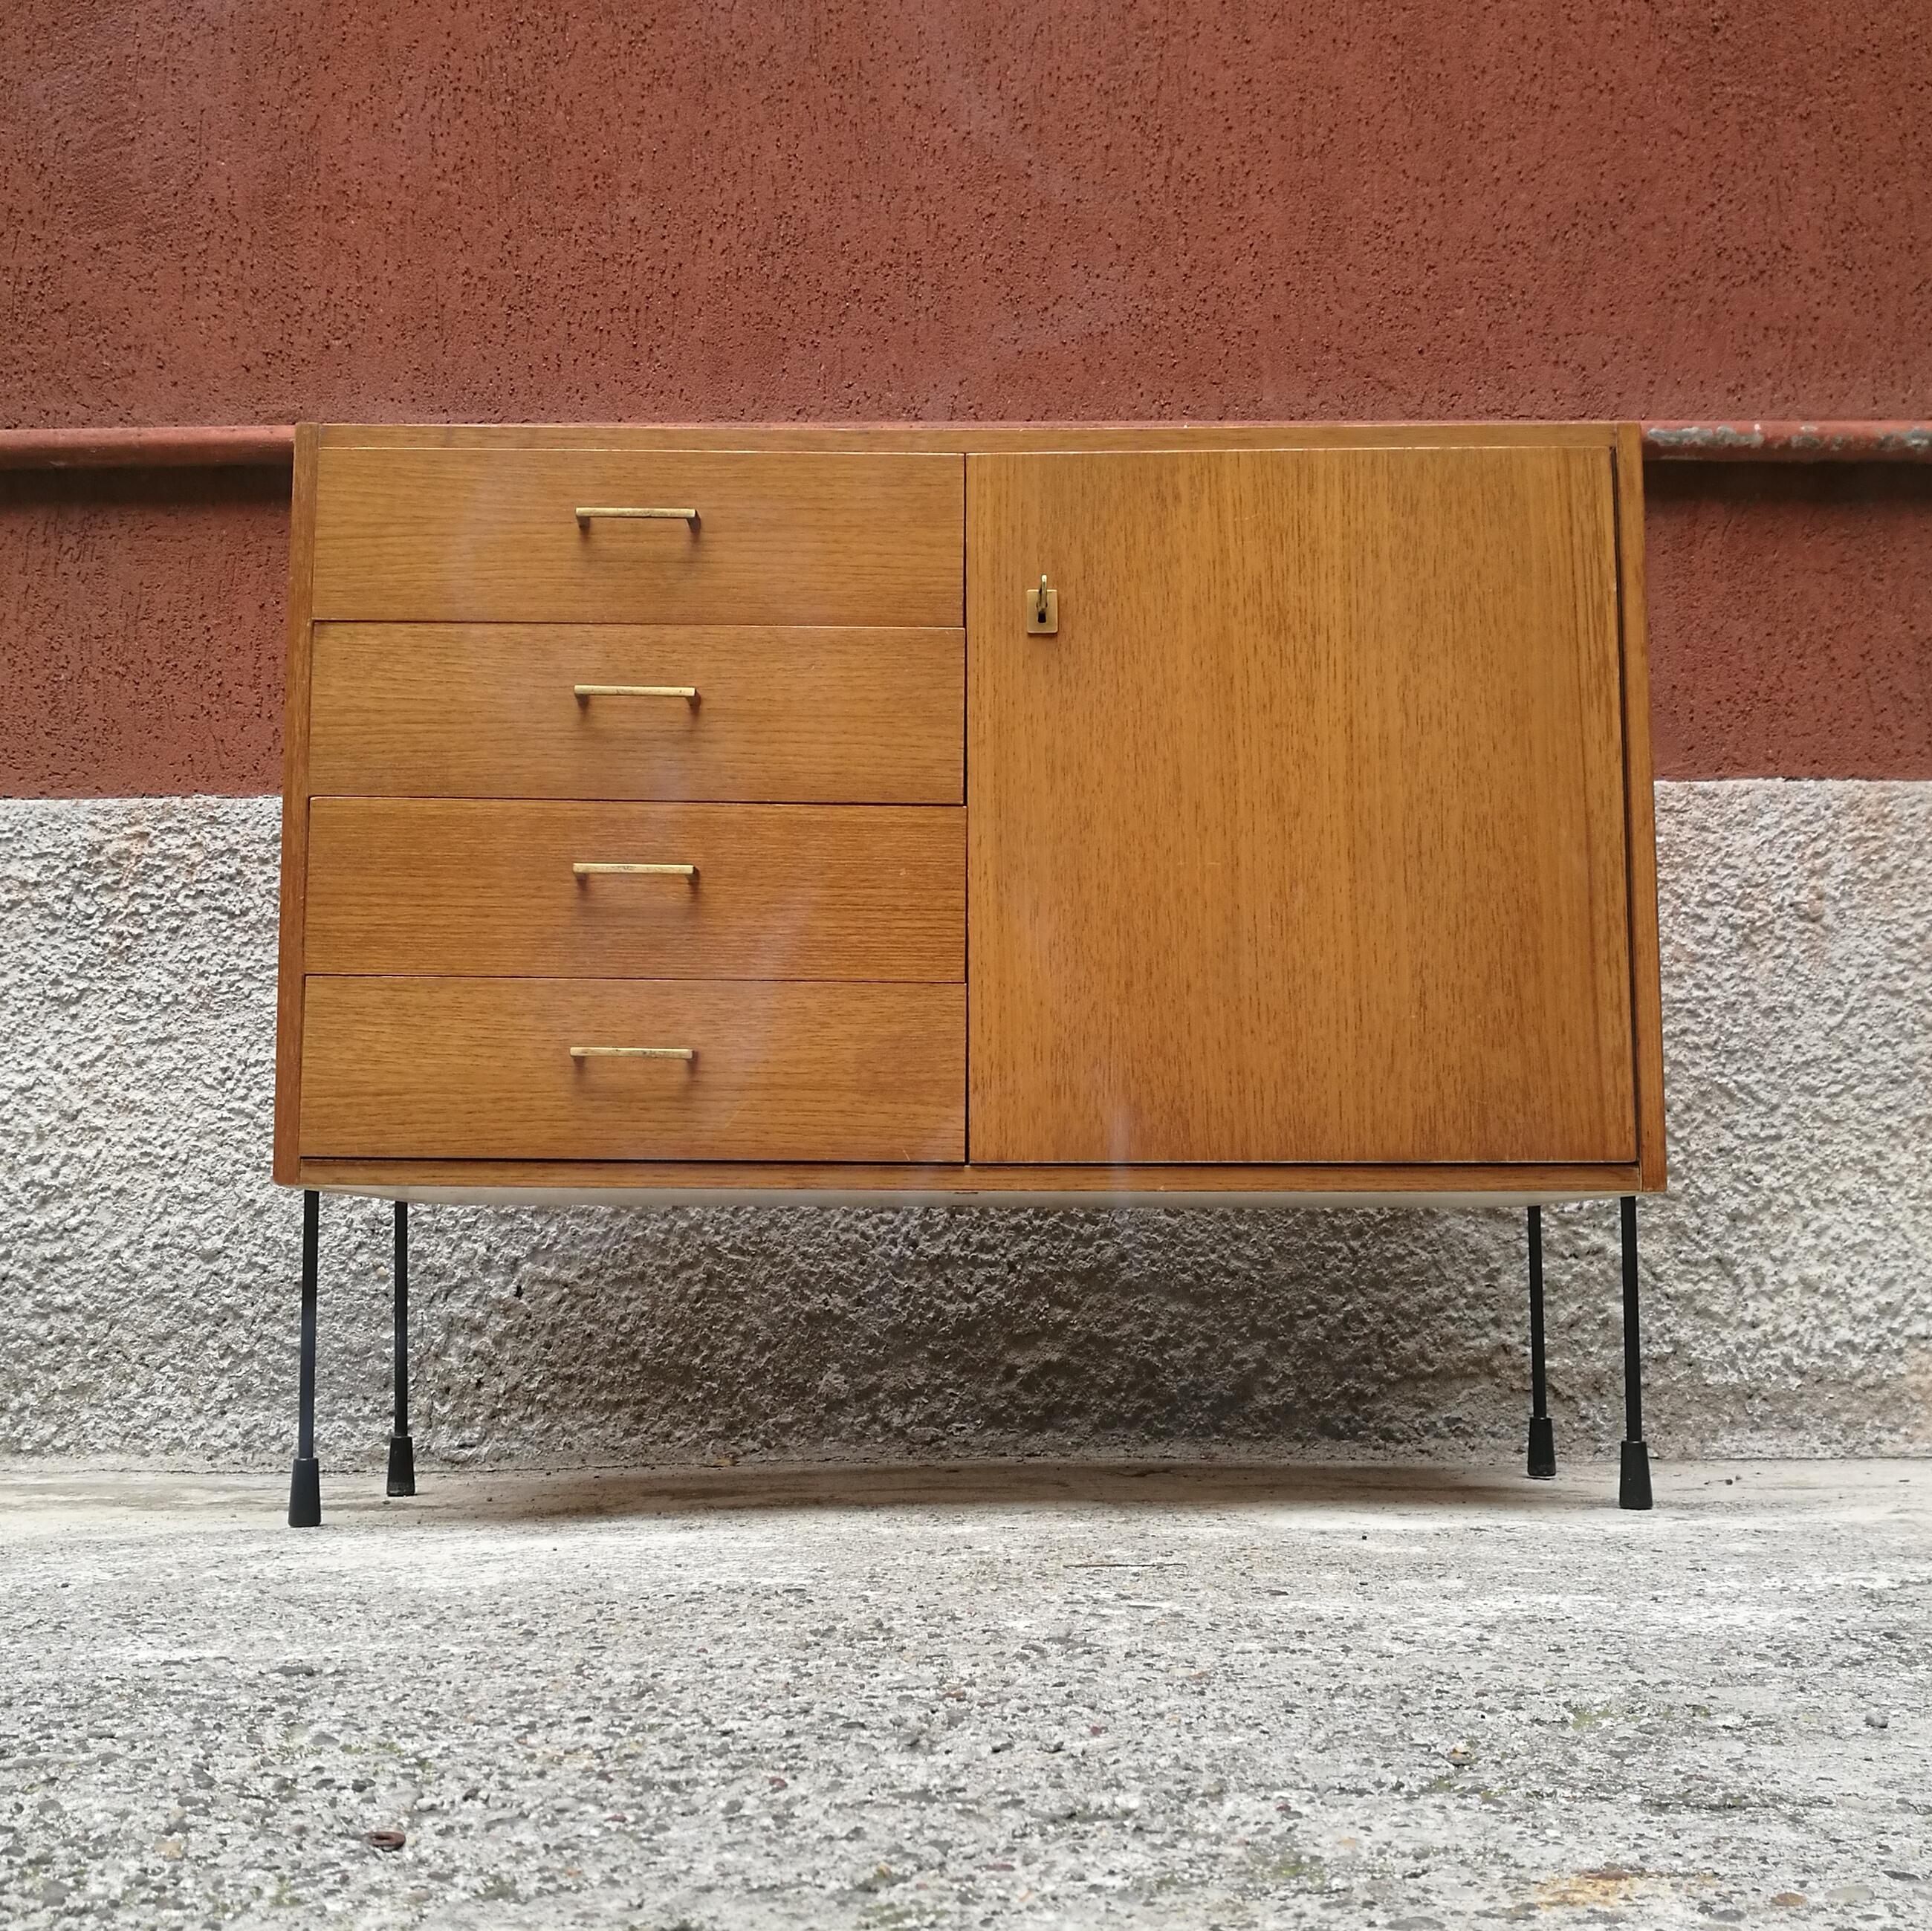 Northern Europe, one-door and drawers, teak, brass and metal sideboard, 1960s
Small light teak sideboard, with drawers and hinged door, brass handles and key and metal rod legs
with the possibility of wall mounting.